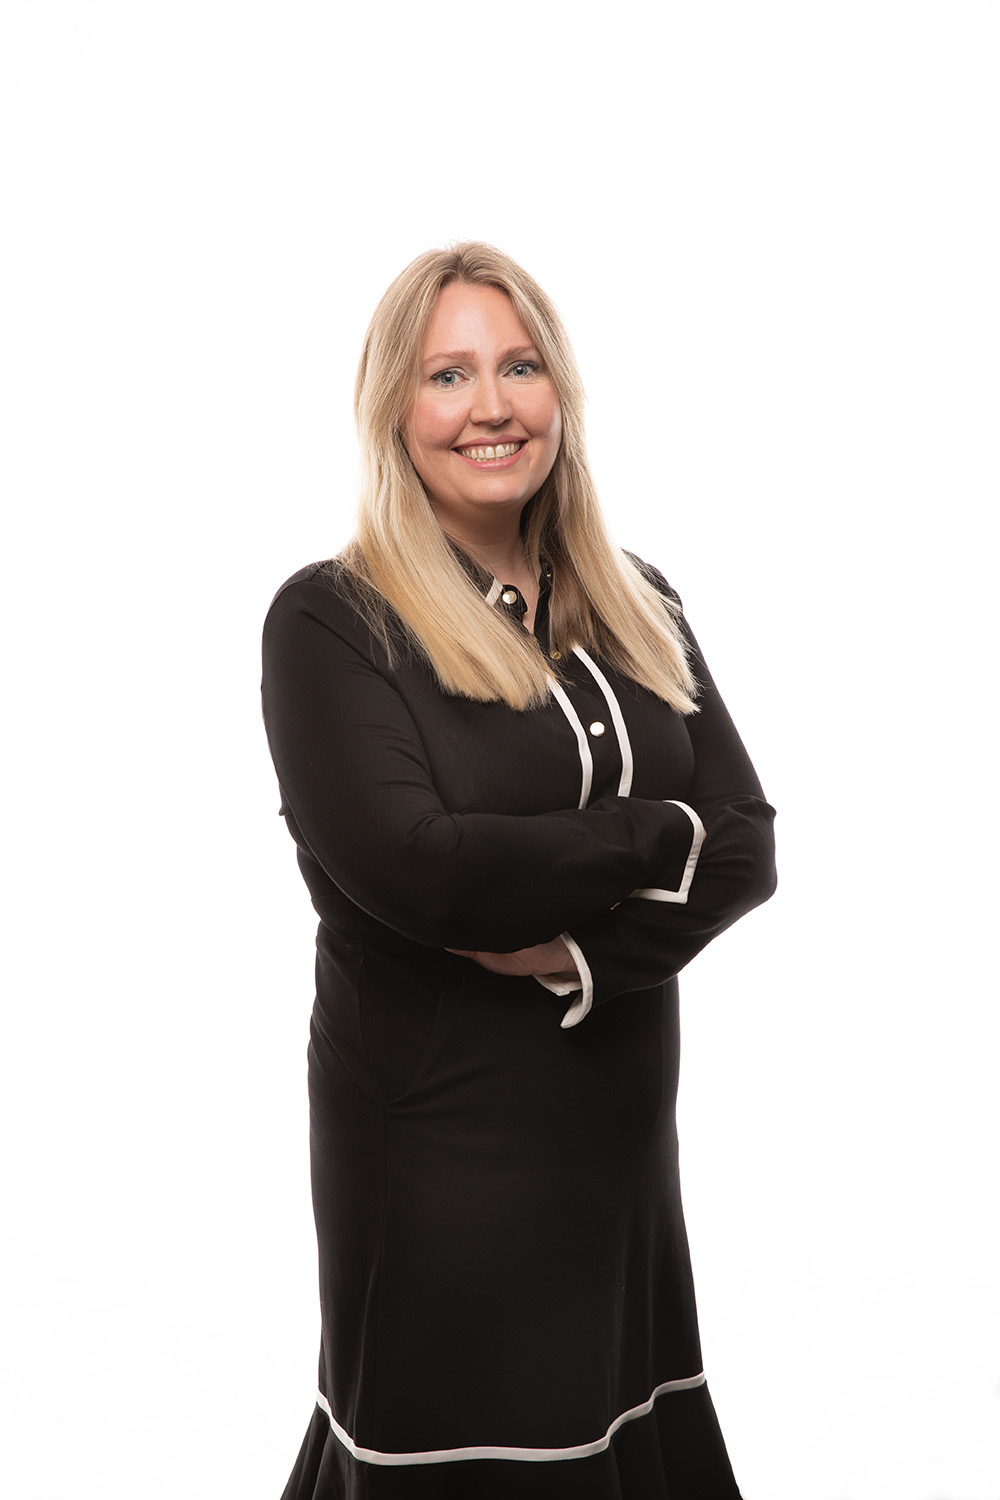 Diamond Heron promotes Cherry Hill to associate solicitor